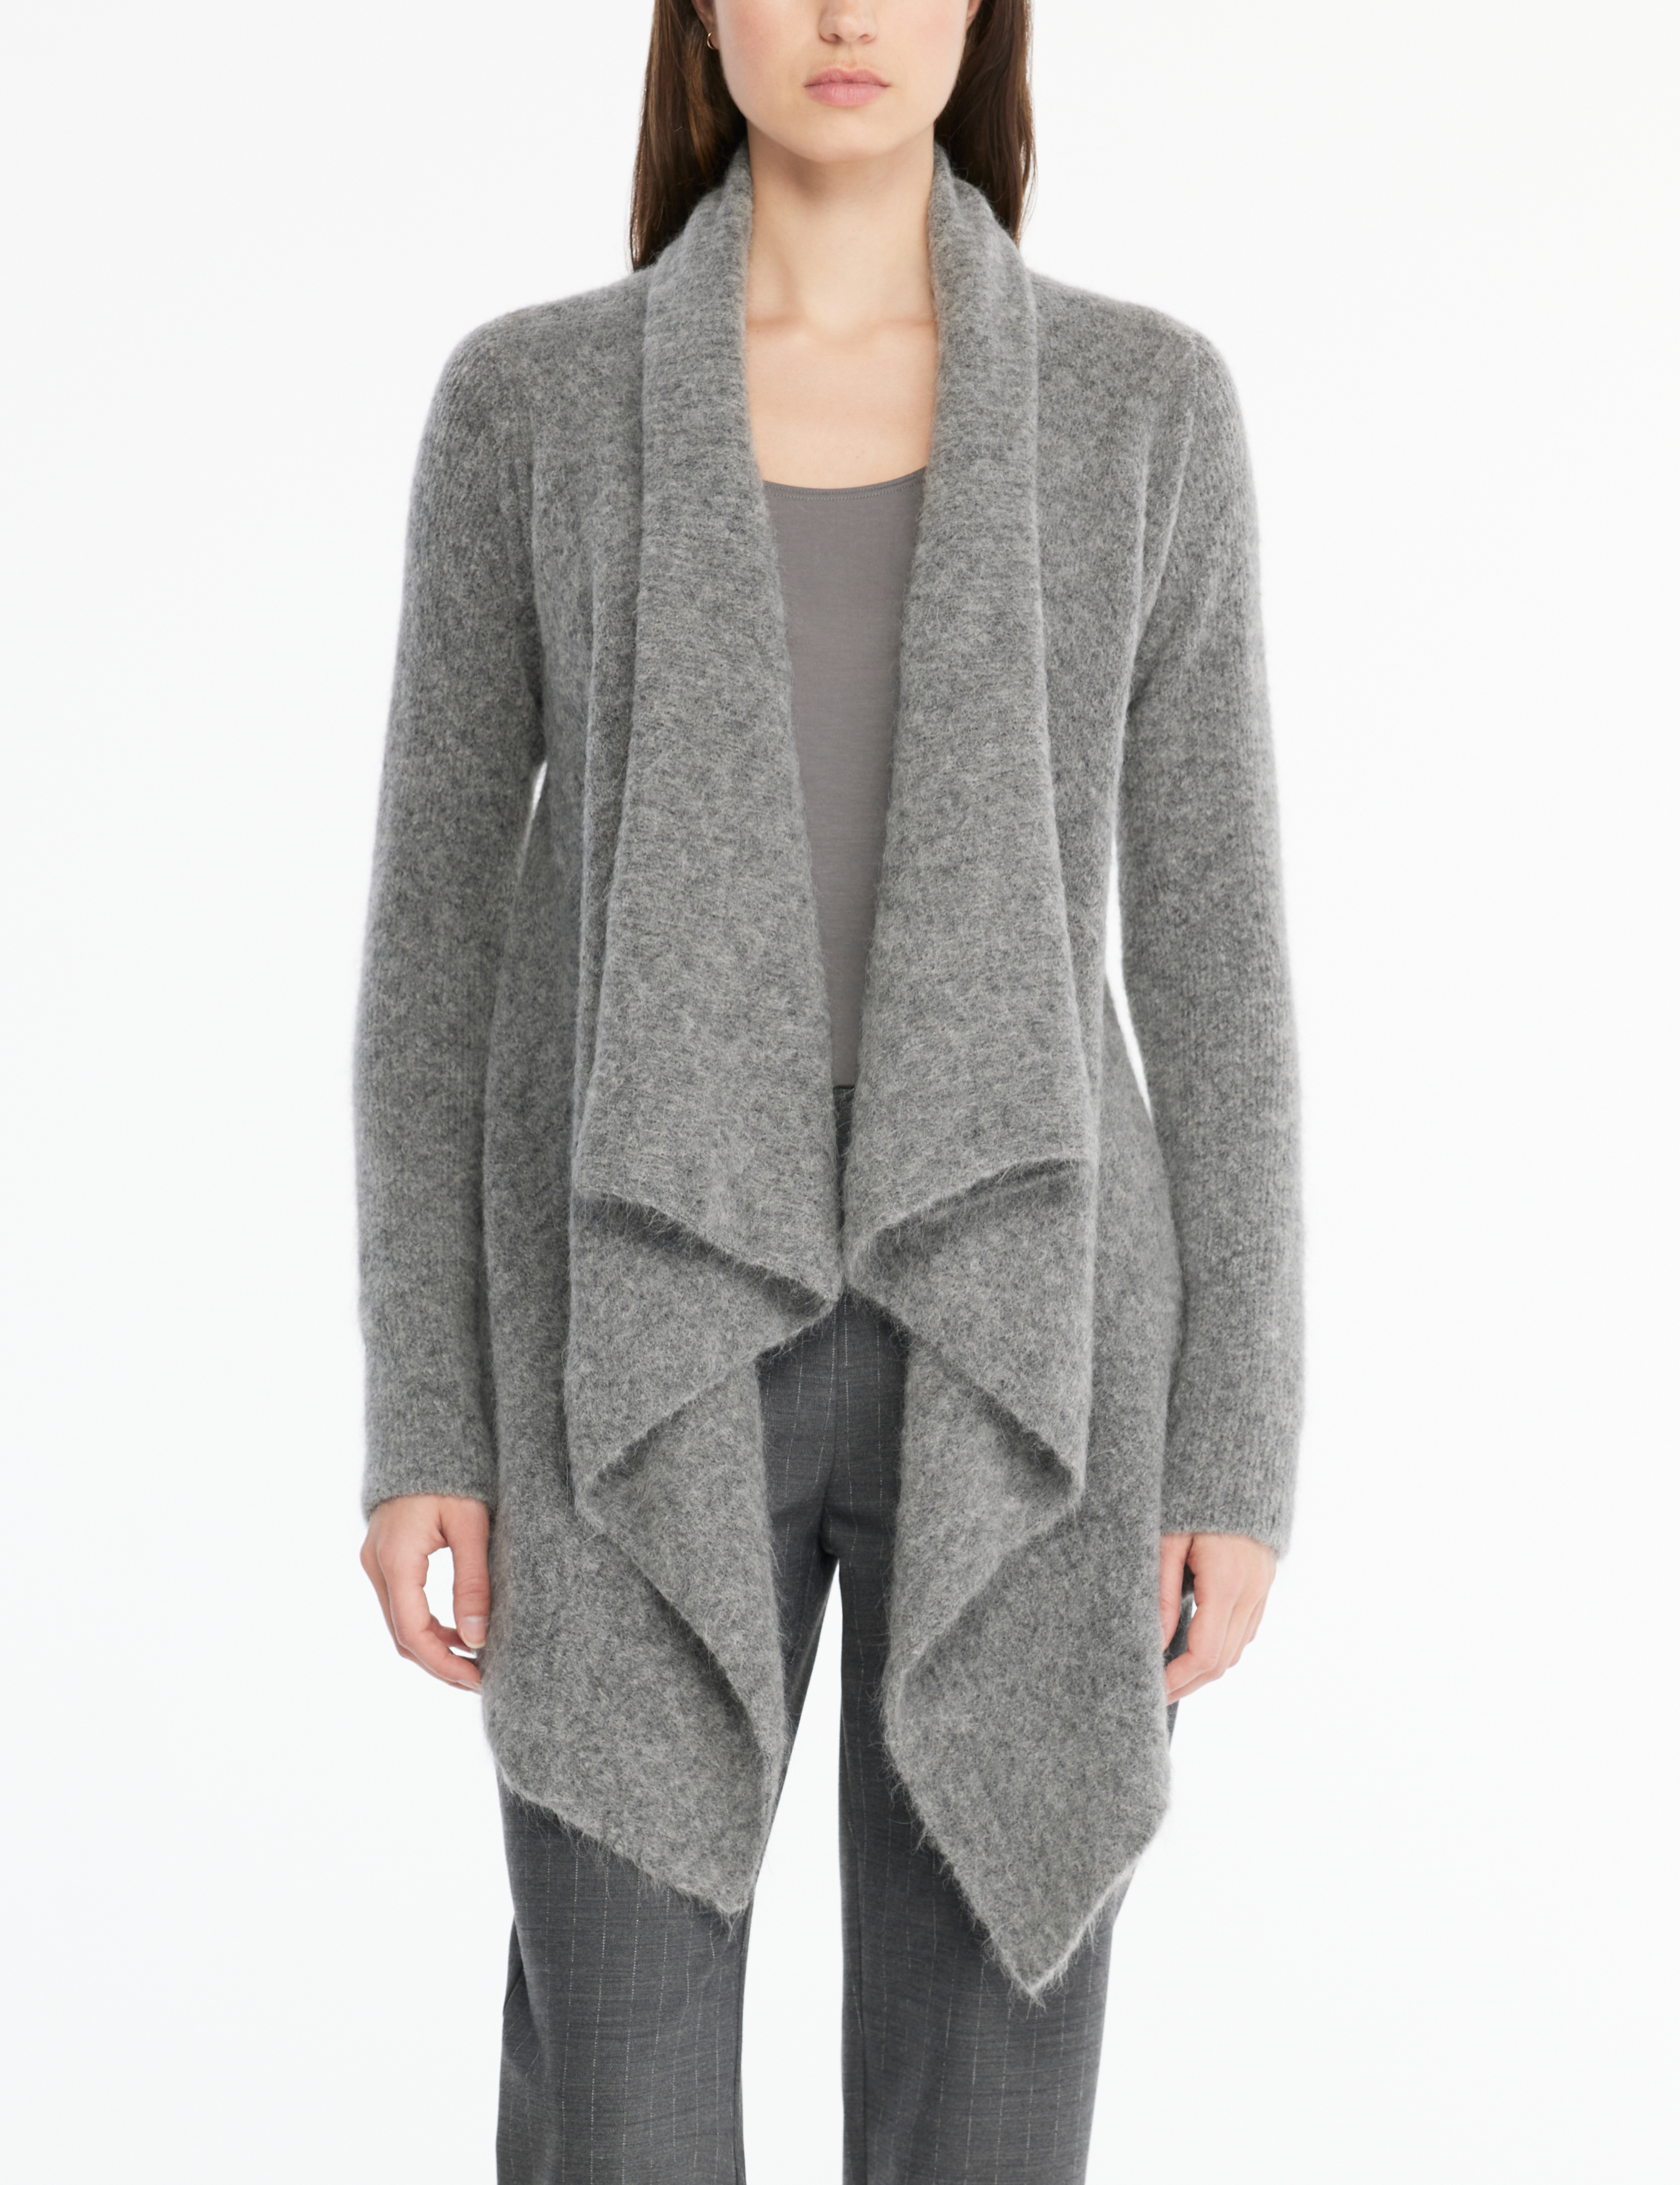 Sarah Pacini women's wool belted open cardigan sweater one size gray